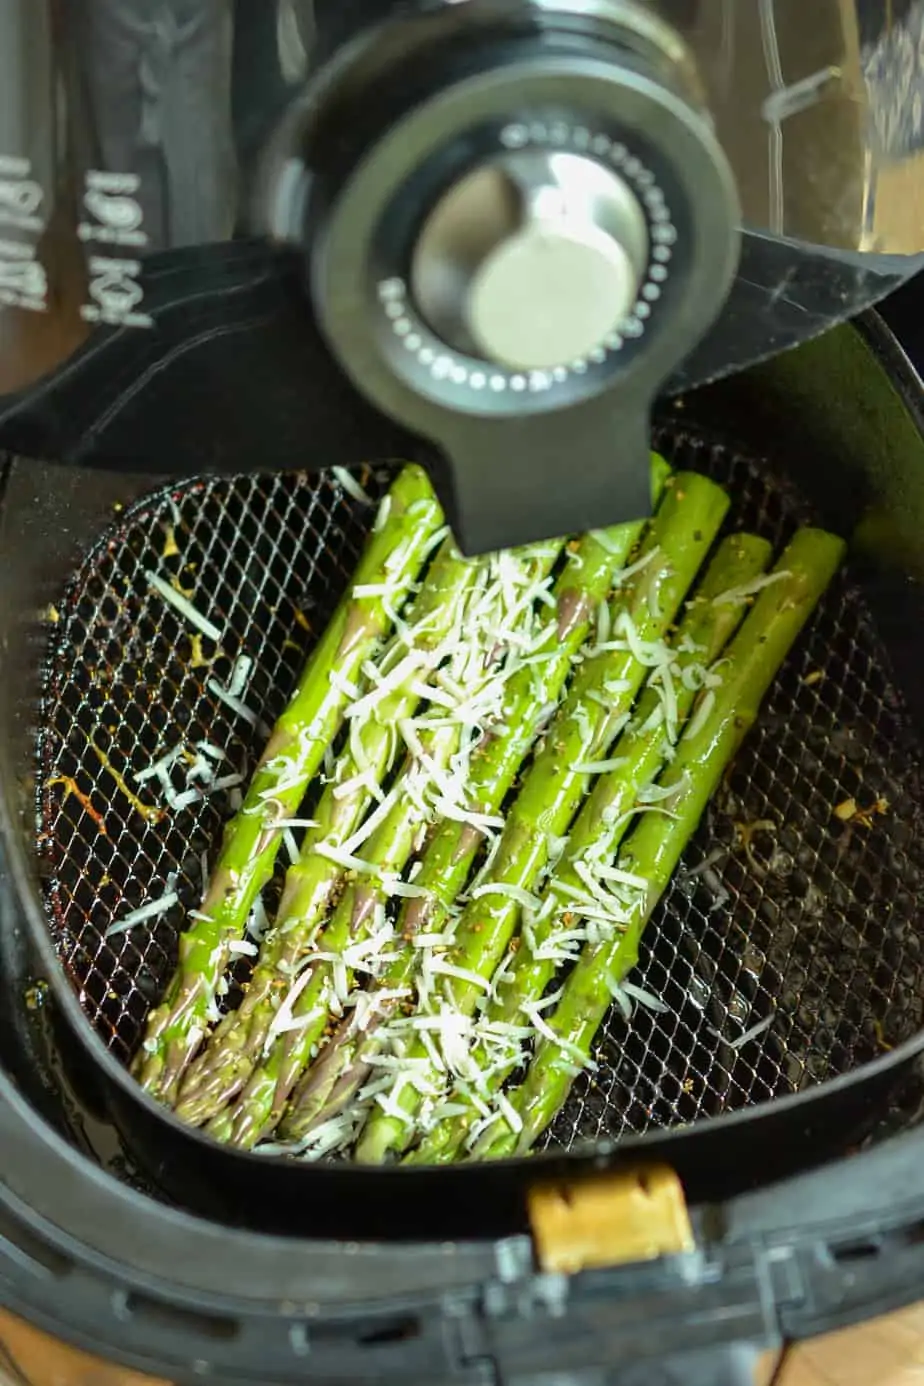 Lay the asparagus in a single layer in the basket of the air fryer. 